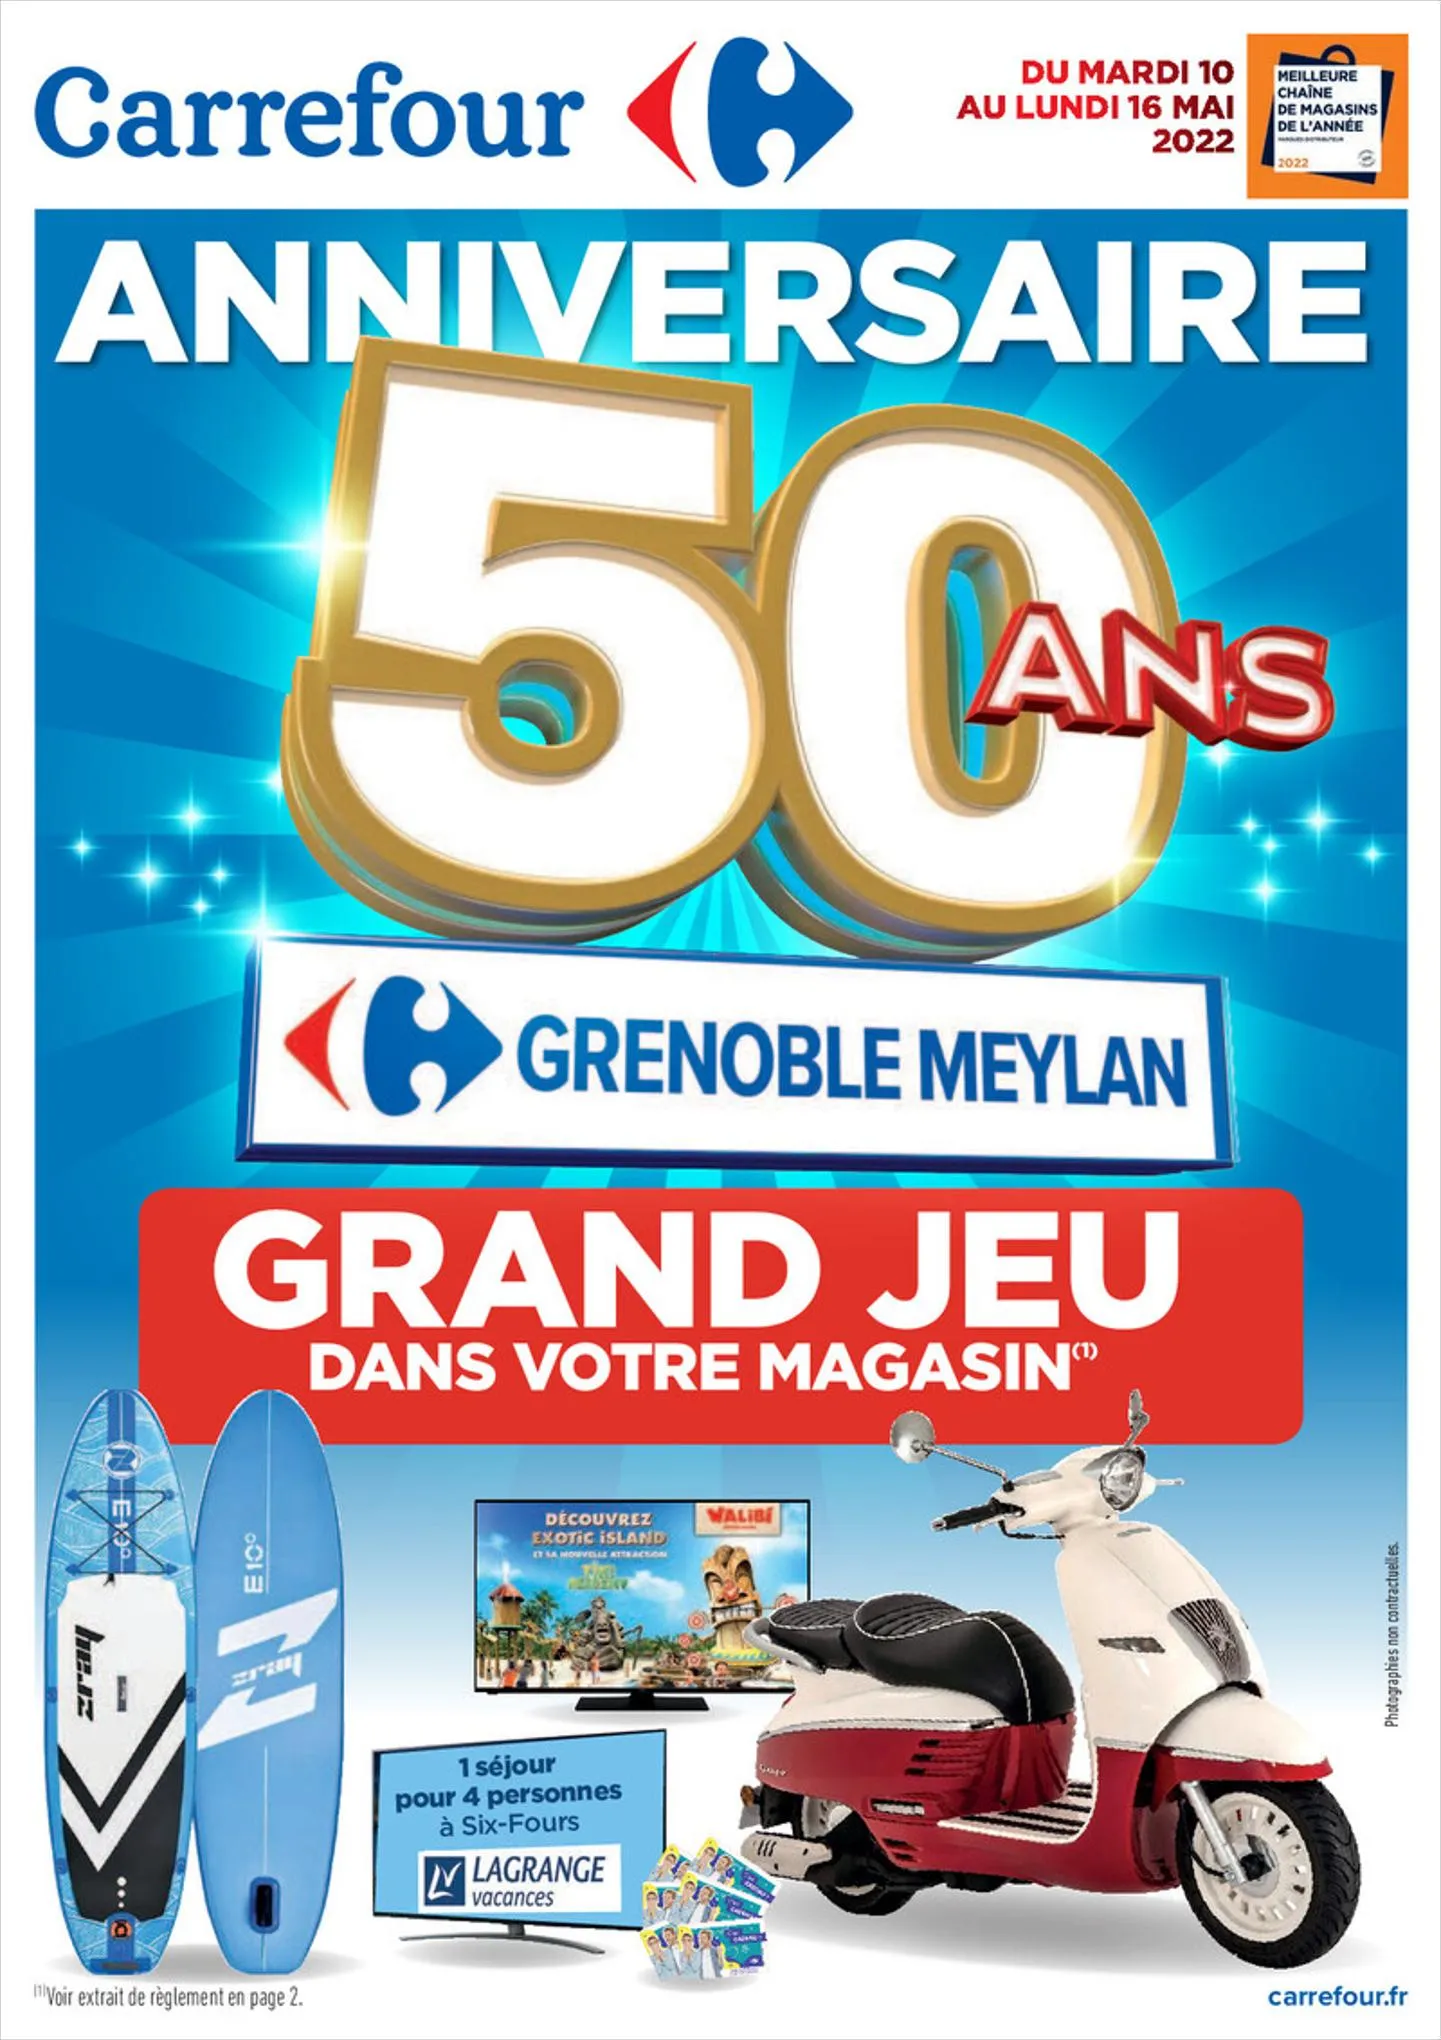 Catalogue Anniversaire 50 ans Grenoble Meylan, page 00001